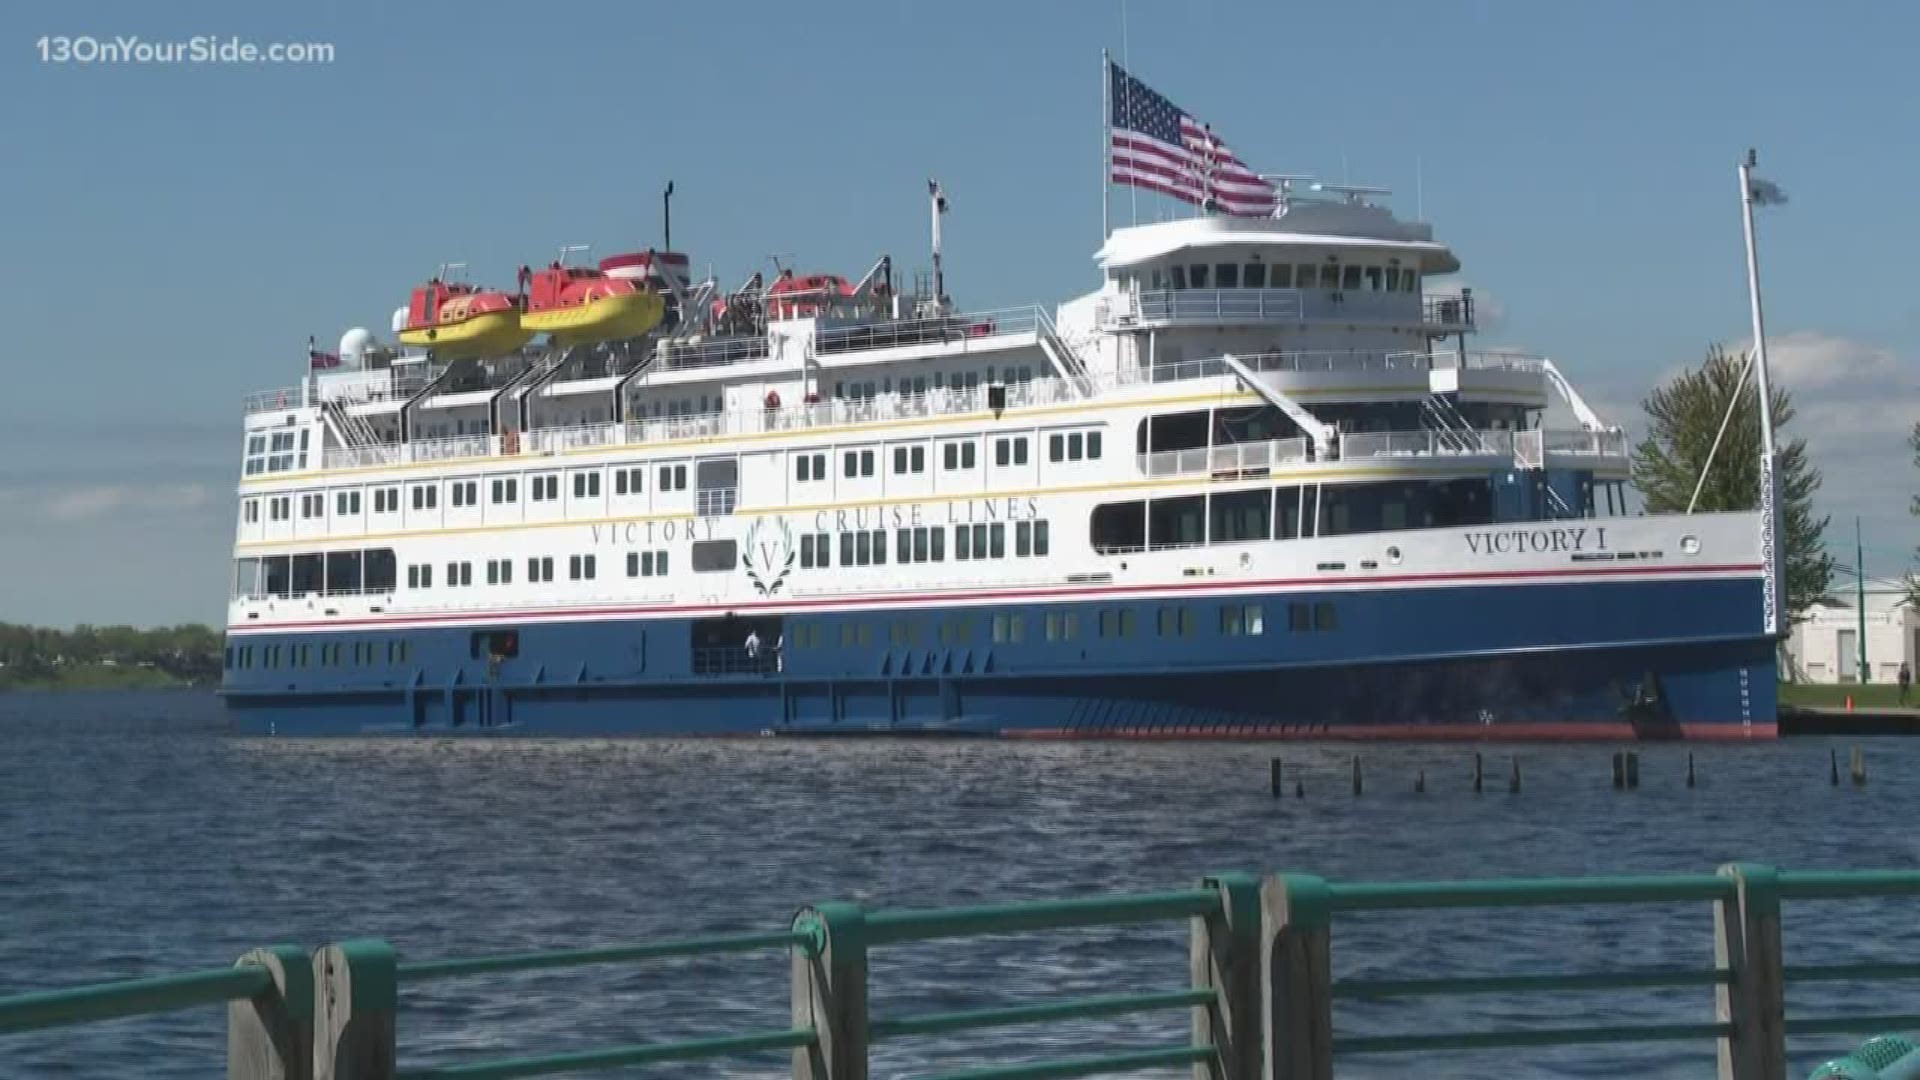 Cruise ships will stop in Muskegon 35 times in 2020 from May to October.